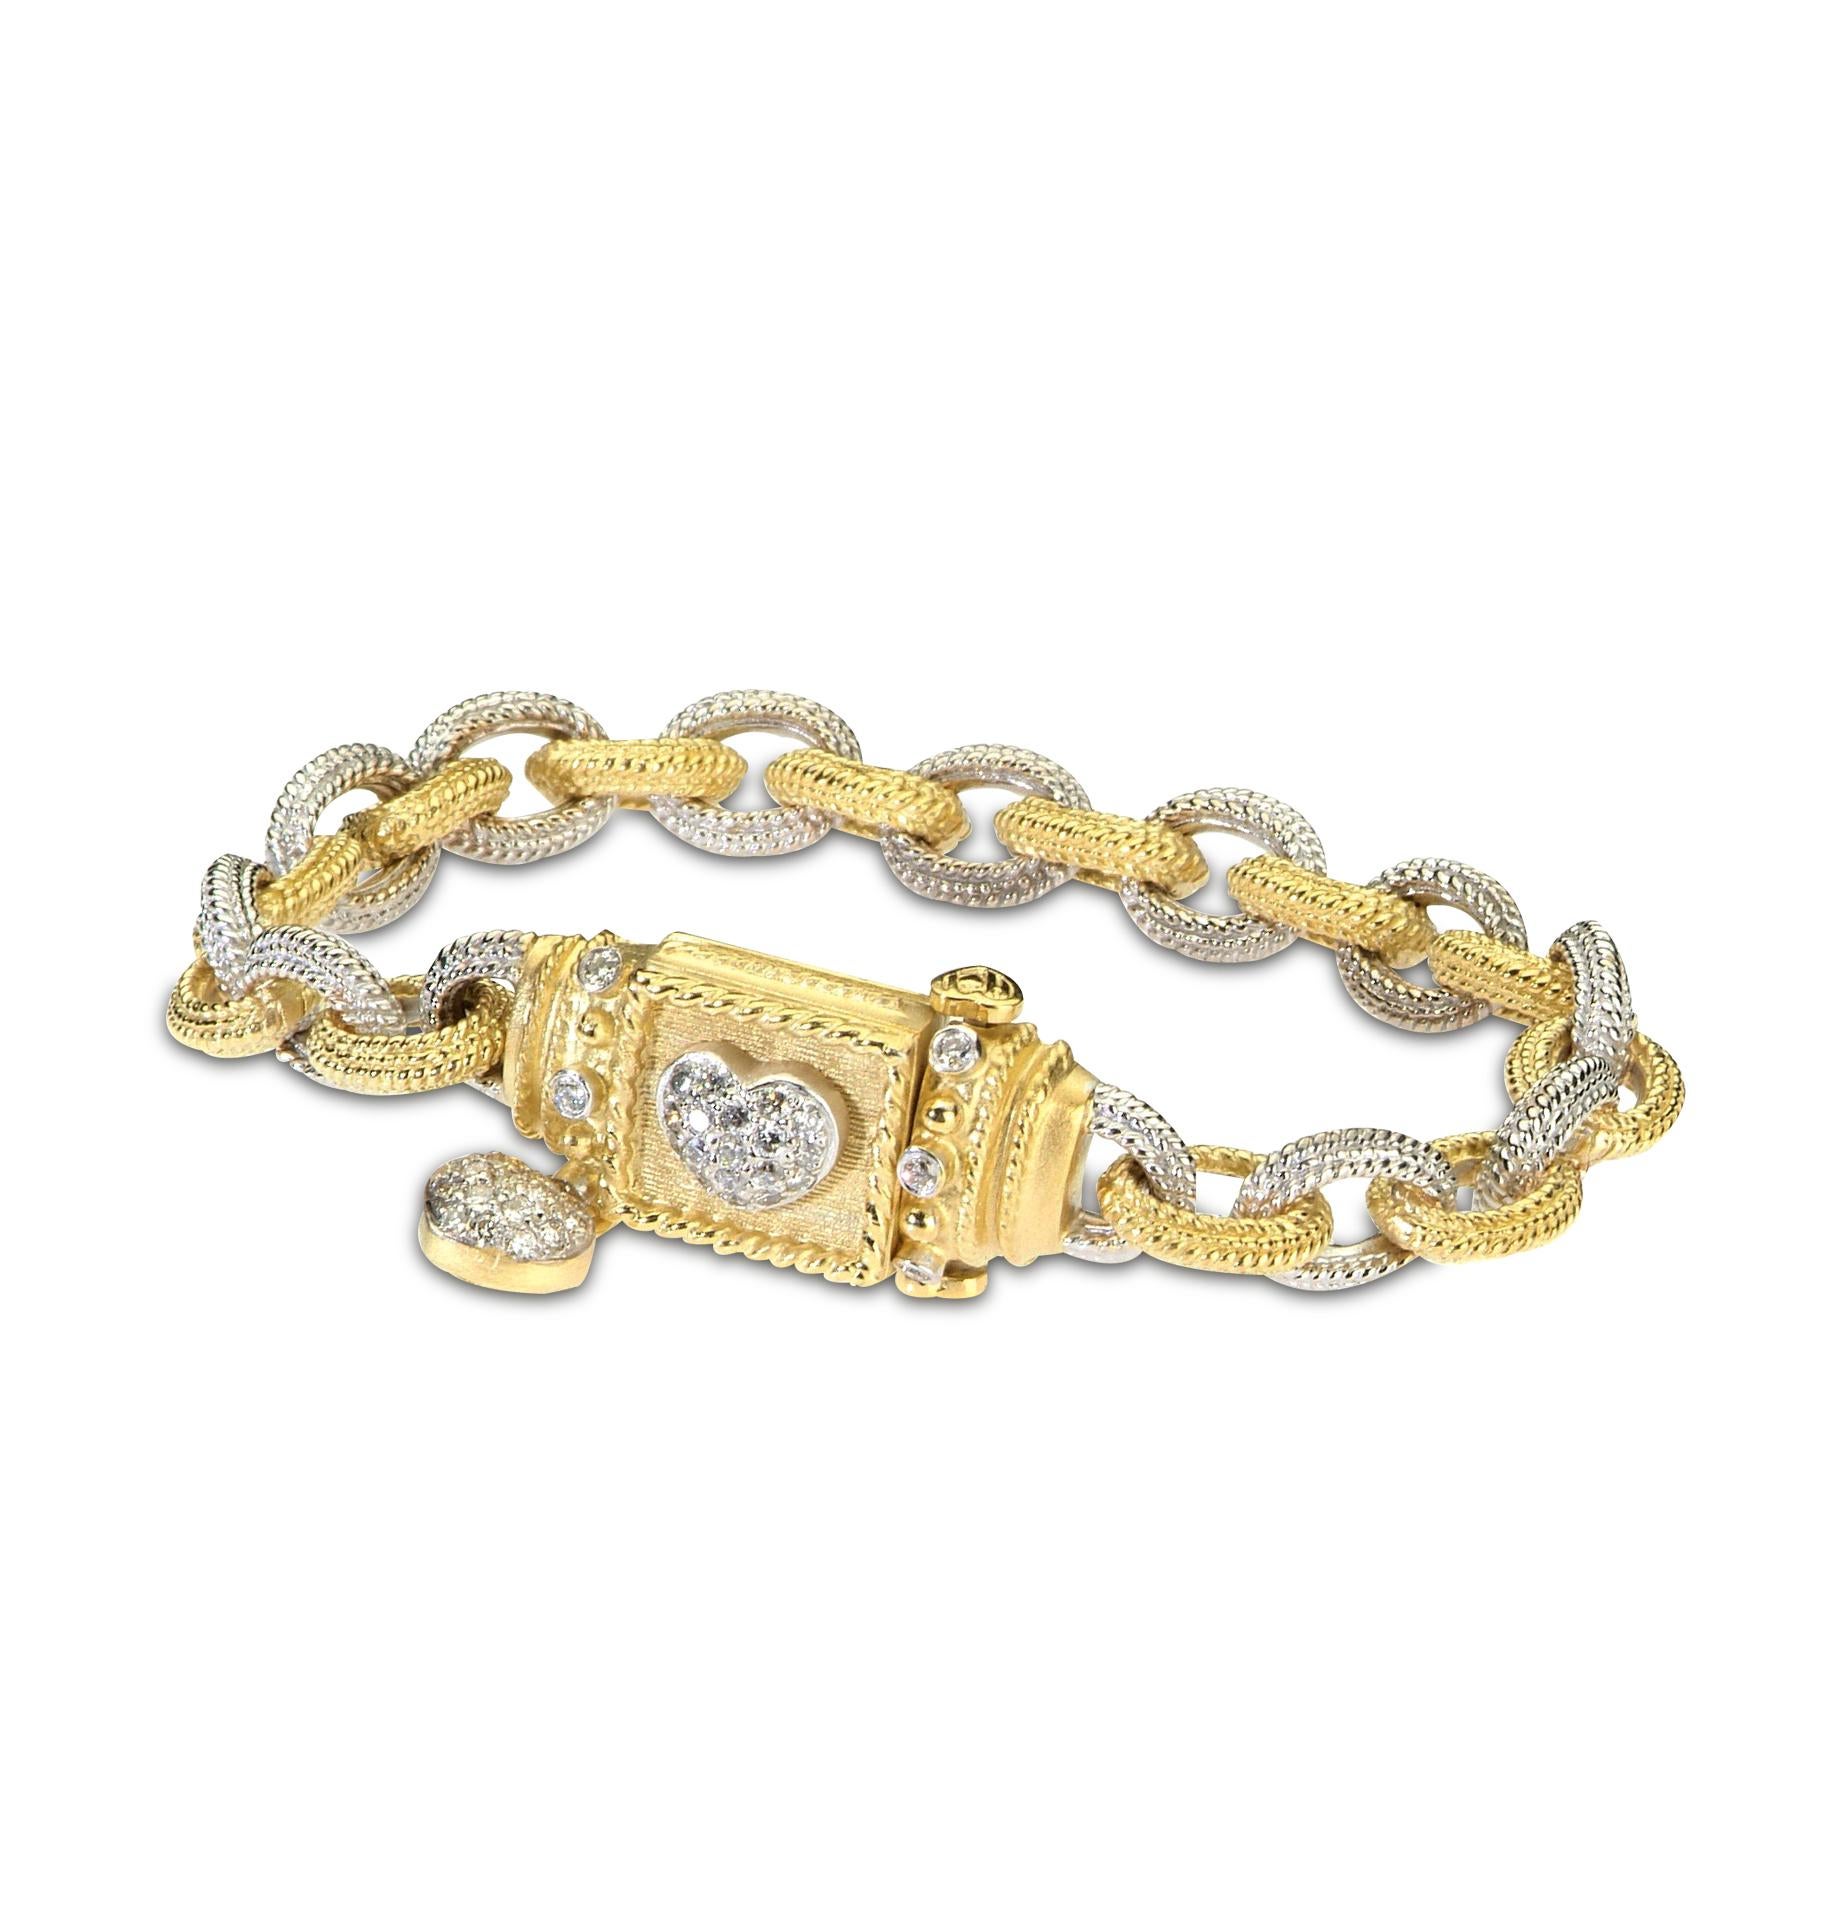 18K Yellow White Two-Tone Gold and Diamond Link Bracelet with Heart Clasp and Dangling Diamond Heart Charm by Stambolian

This staple from the Stambolian collection is a timeless bracelet with unique and original design

The links are alternating